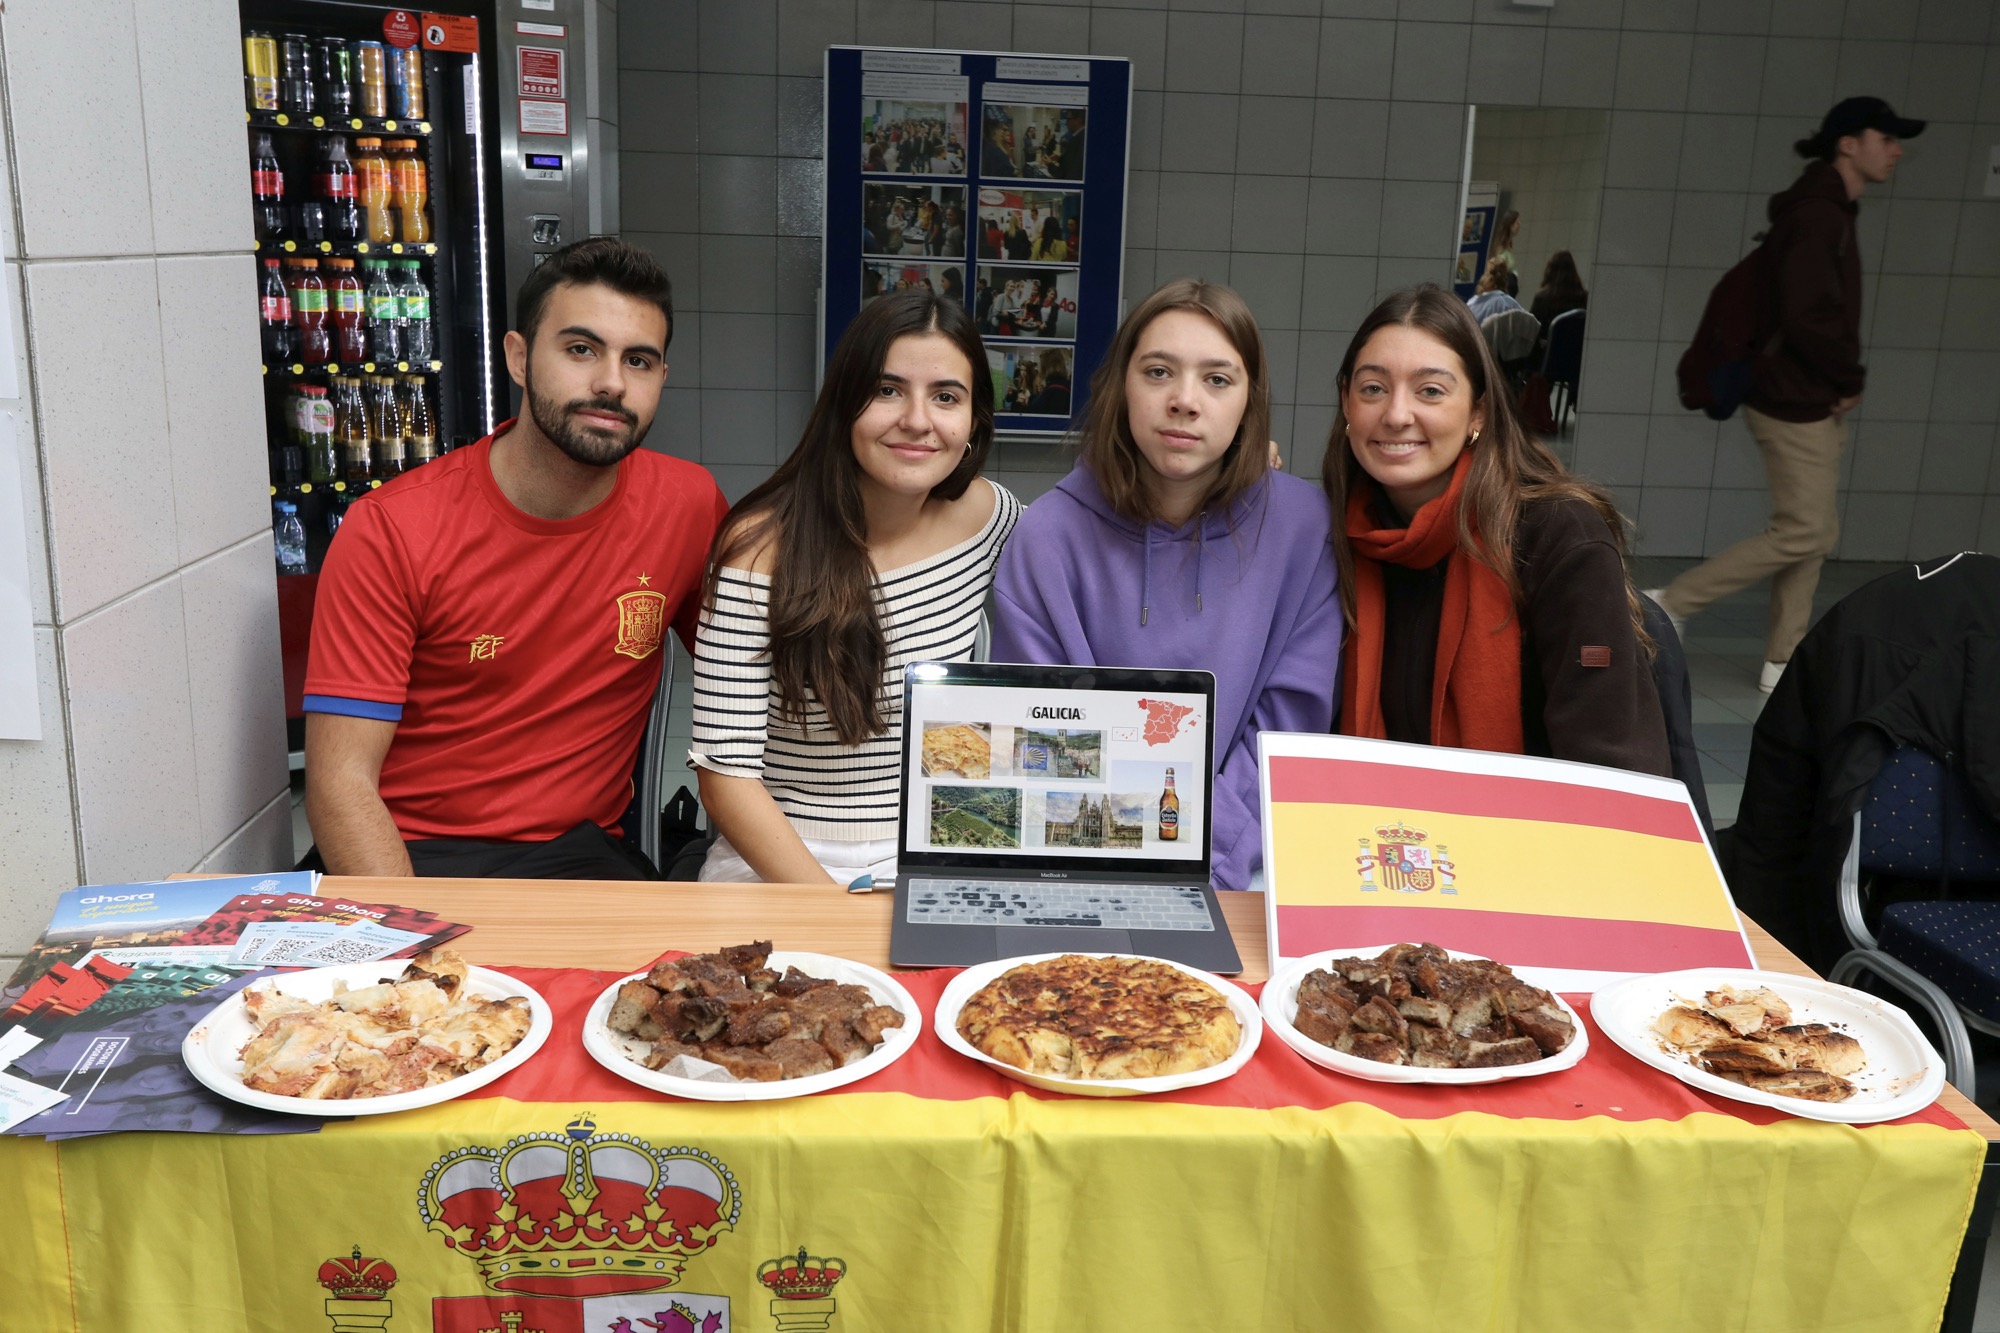 9th International Study Abroad Fair took place